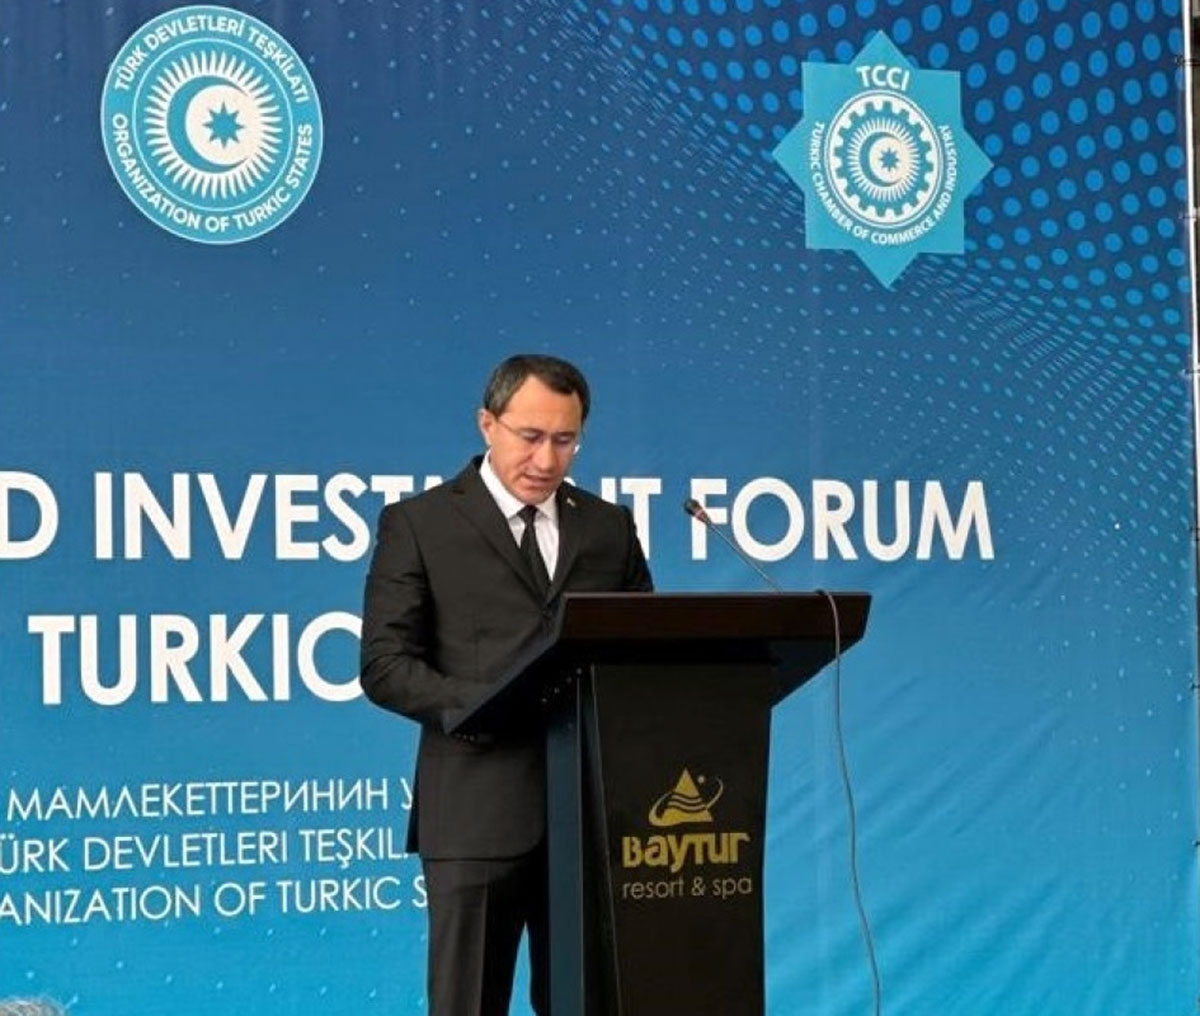 The delegation of Turkmenistan participated in the International Business Forum of the Organization of Turkic States in Cholpon-Ata